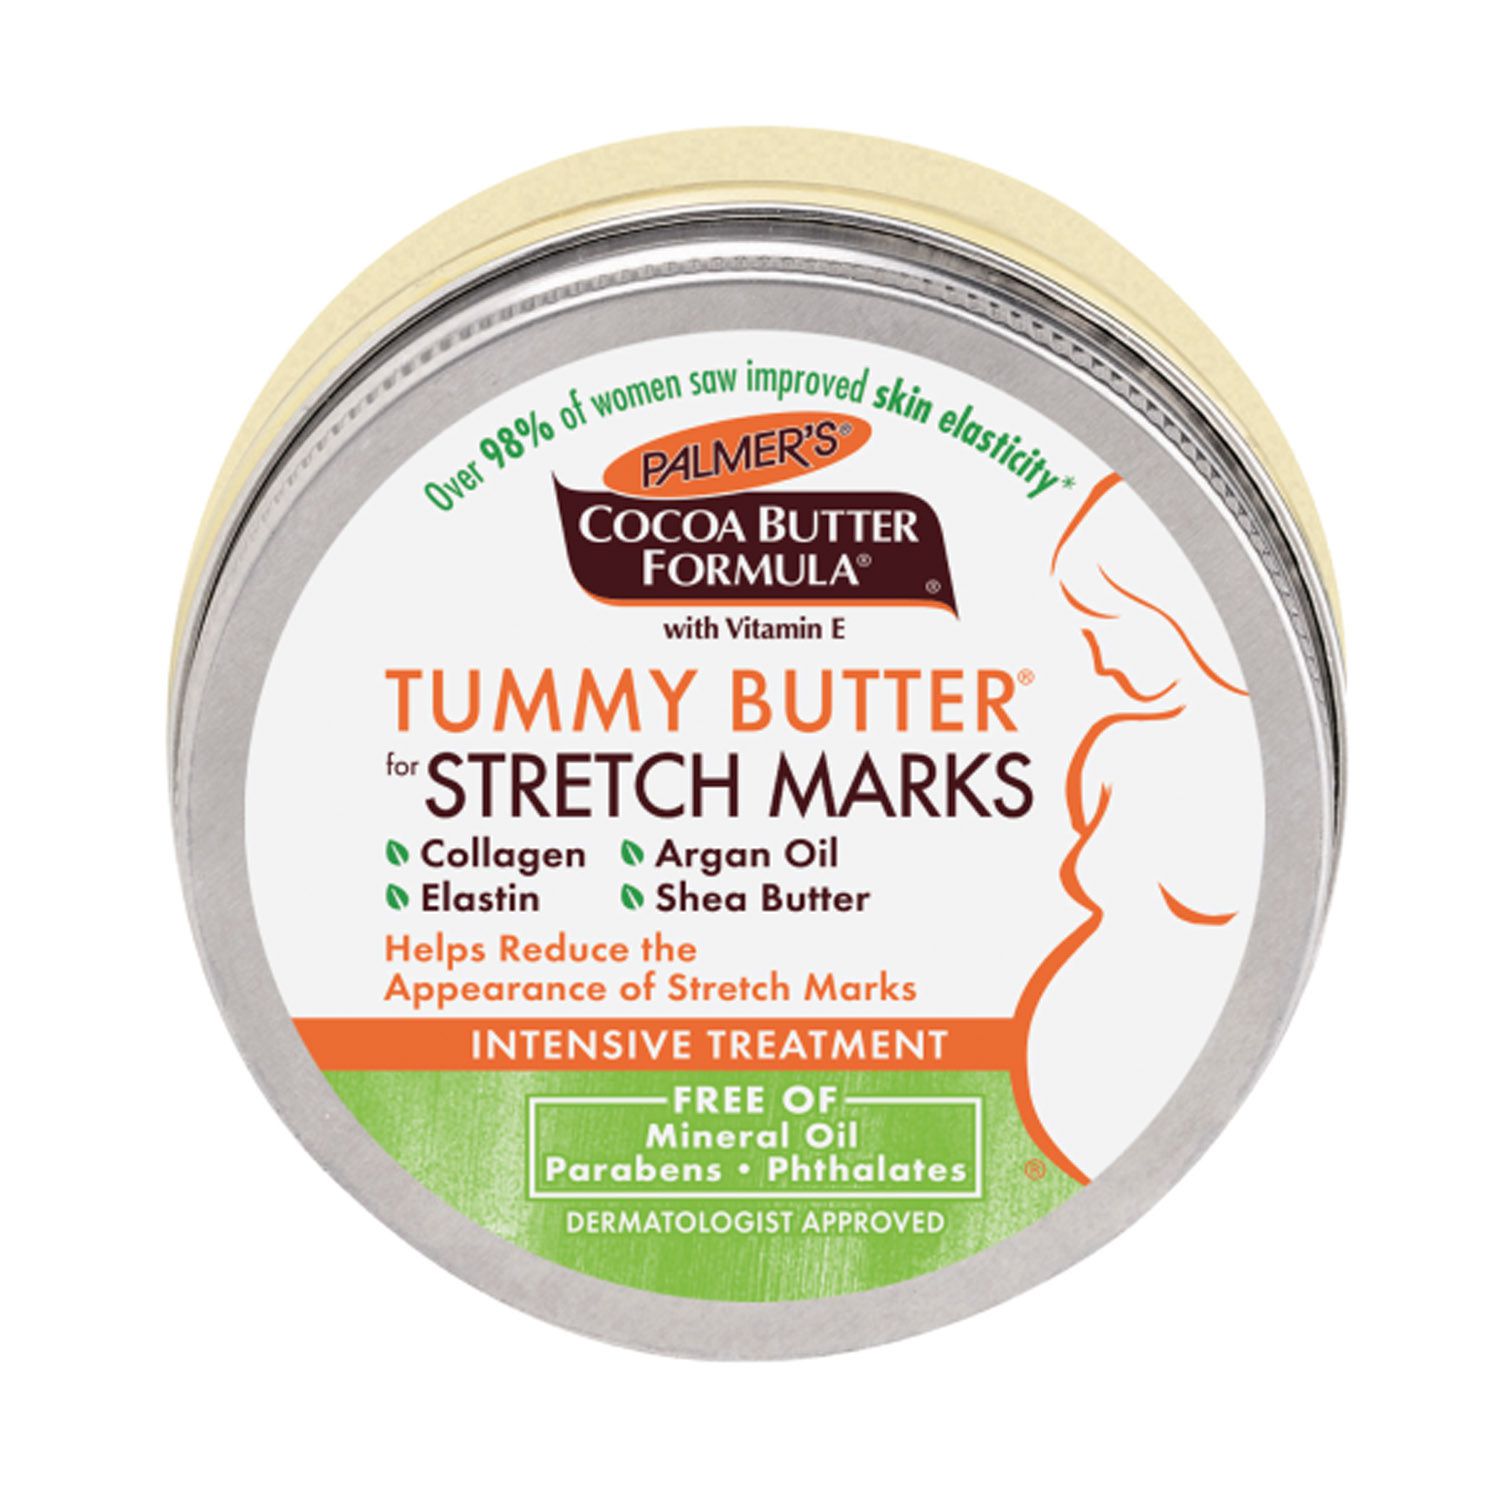 Cocoa Palmers Tummy Butter for Stretch Marks 125g Estrias Gravidez